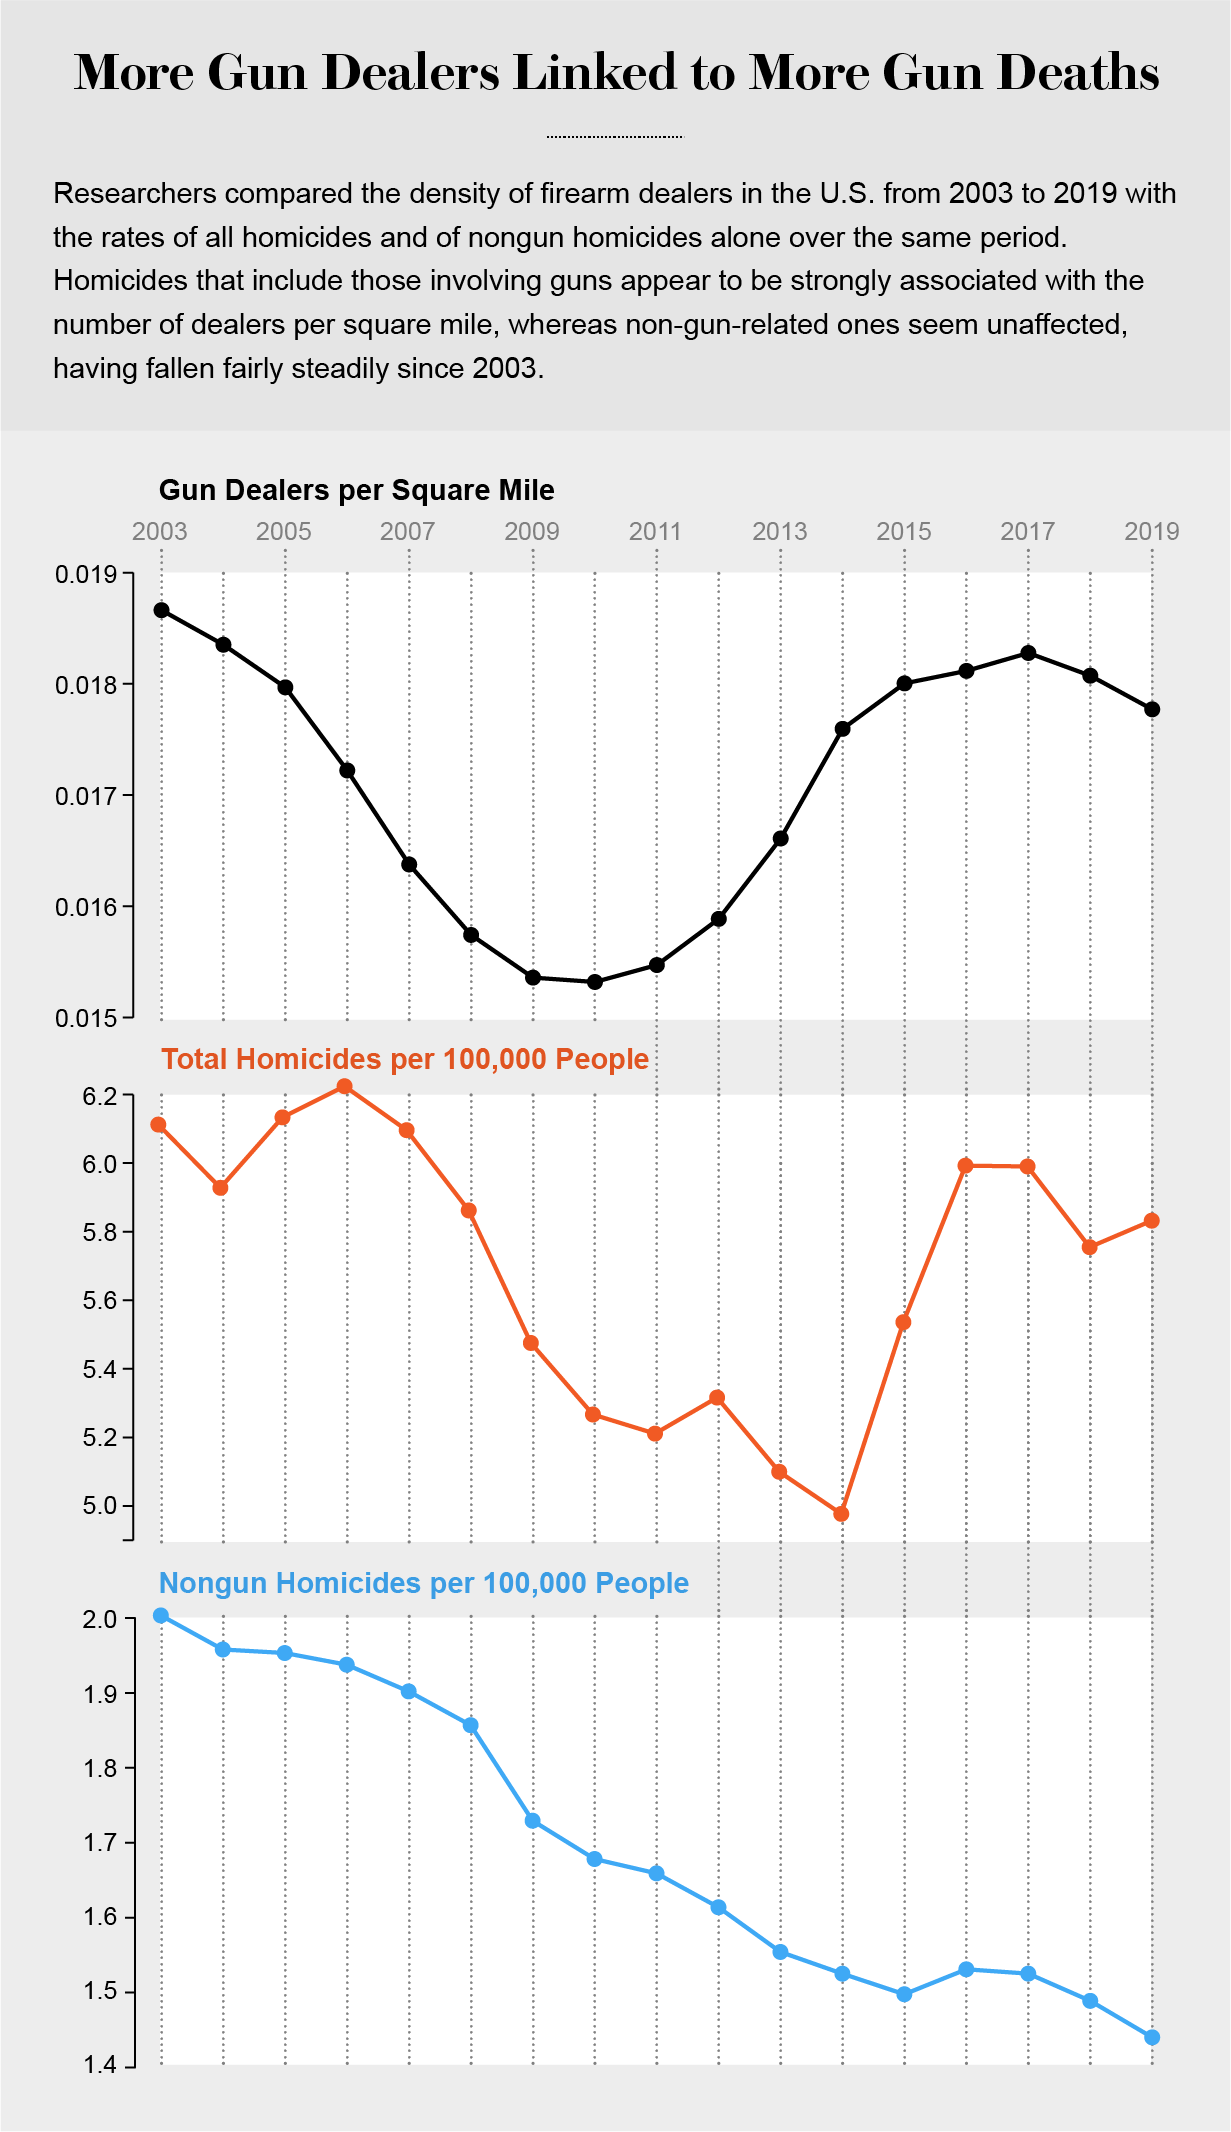 Graphic shows density of gun dealers alongside rates of total and nongun homicides in the U.S. from 2003 to 2019.